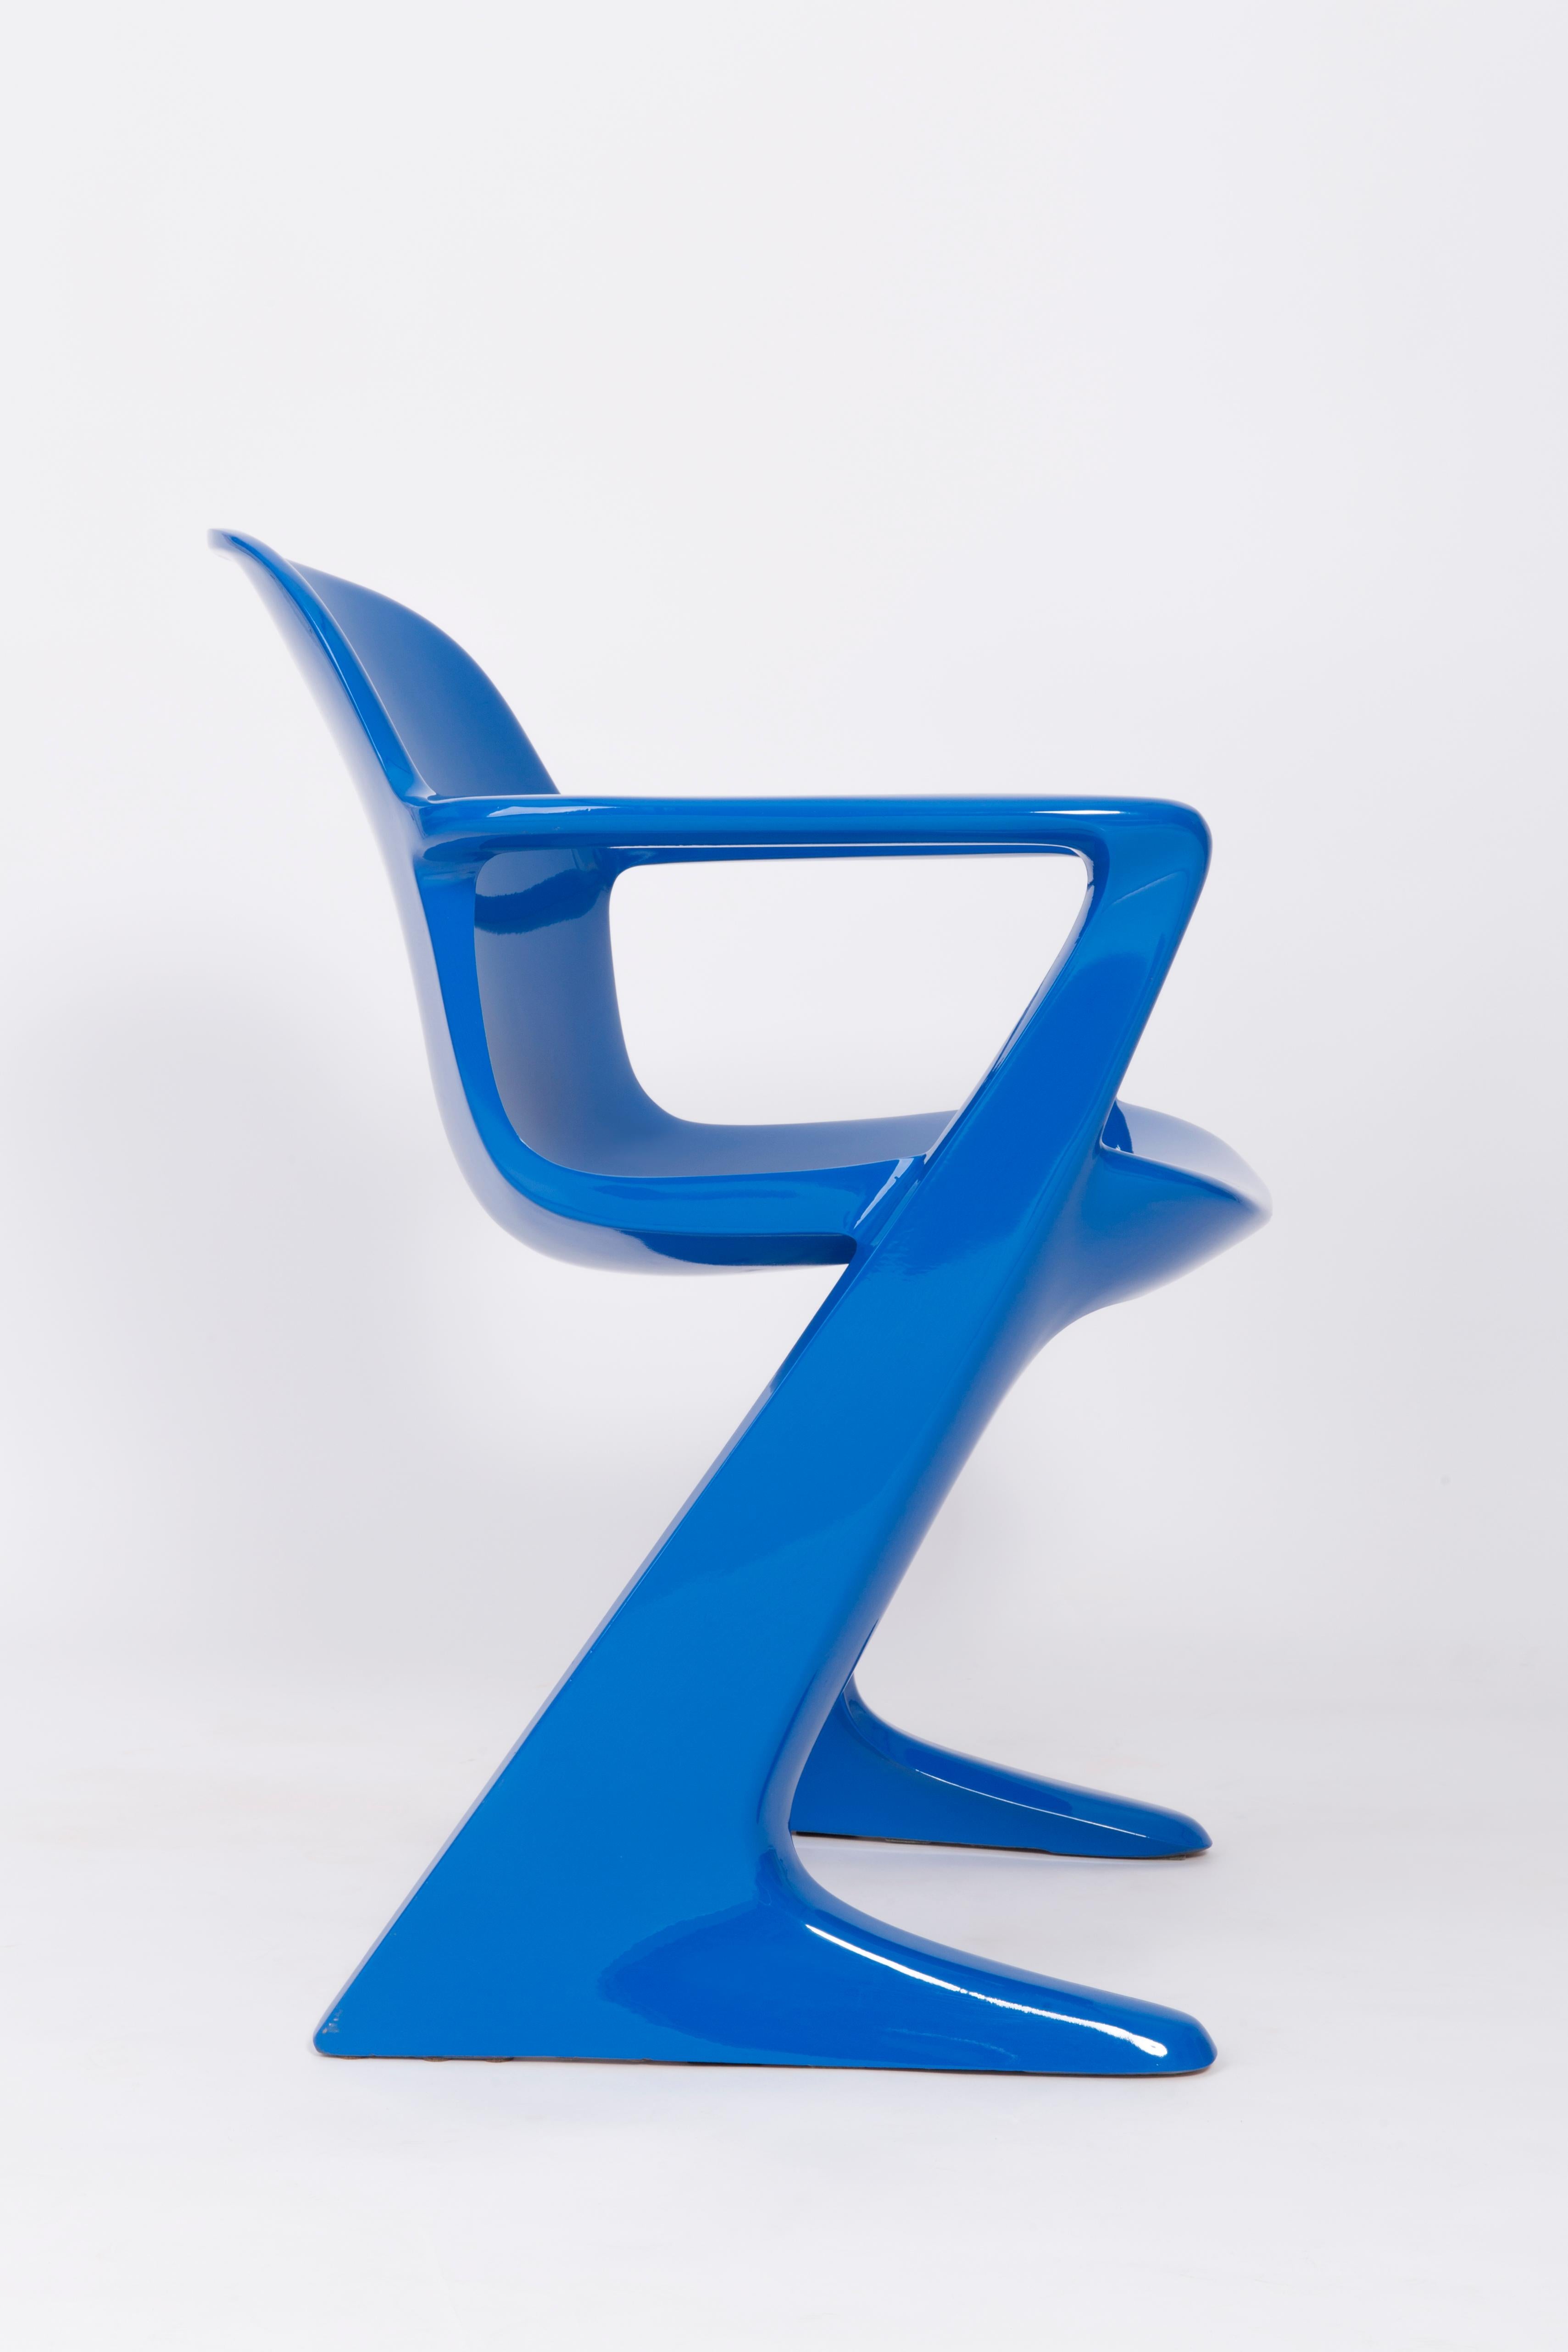 Set of Two Classic Blue Kangaroo Chairs Designed by Ernst Moeckl, Germany, 1968 For Sale 1